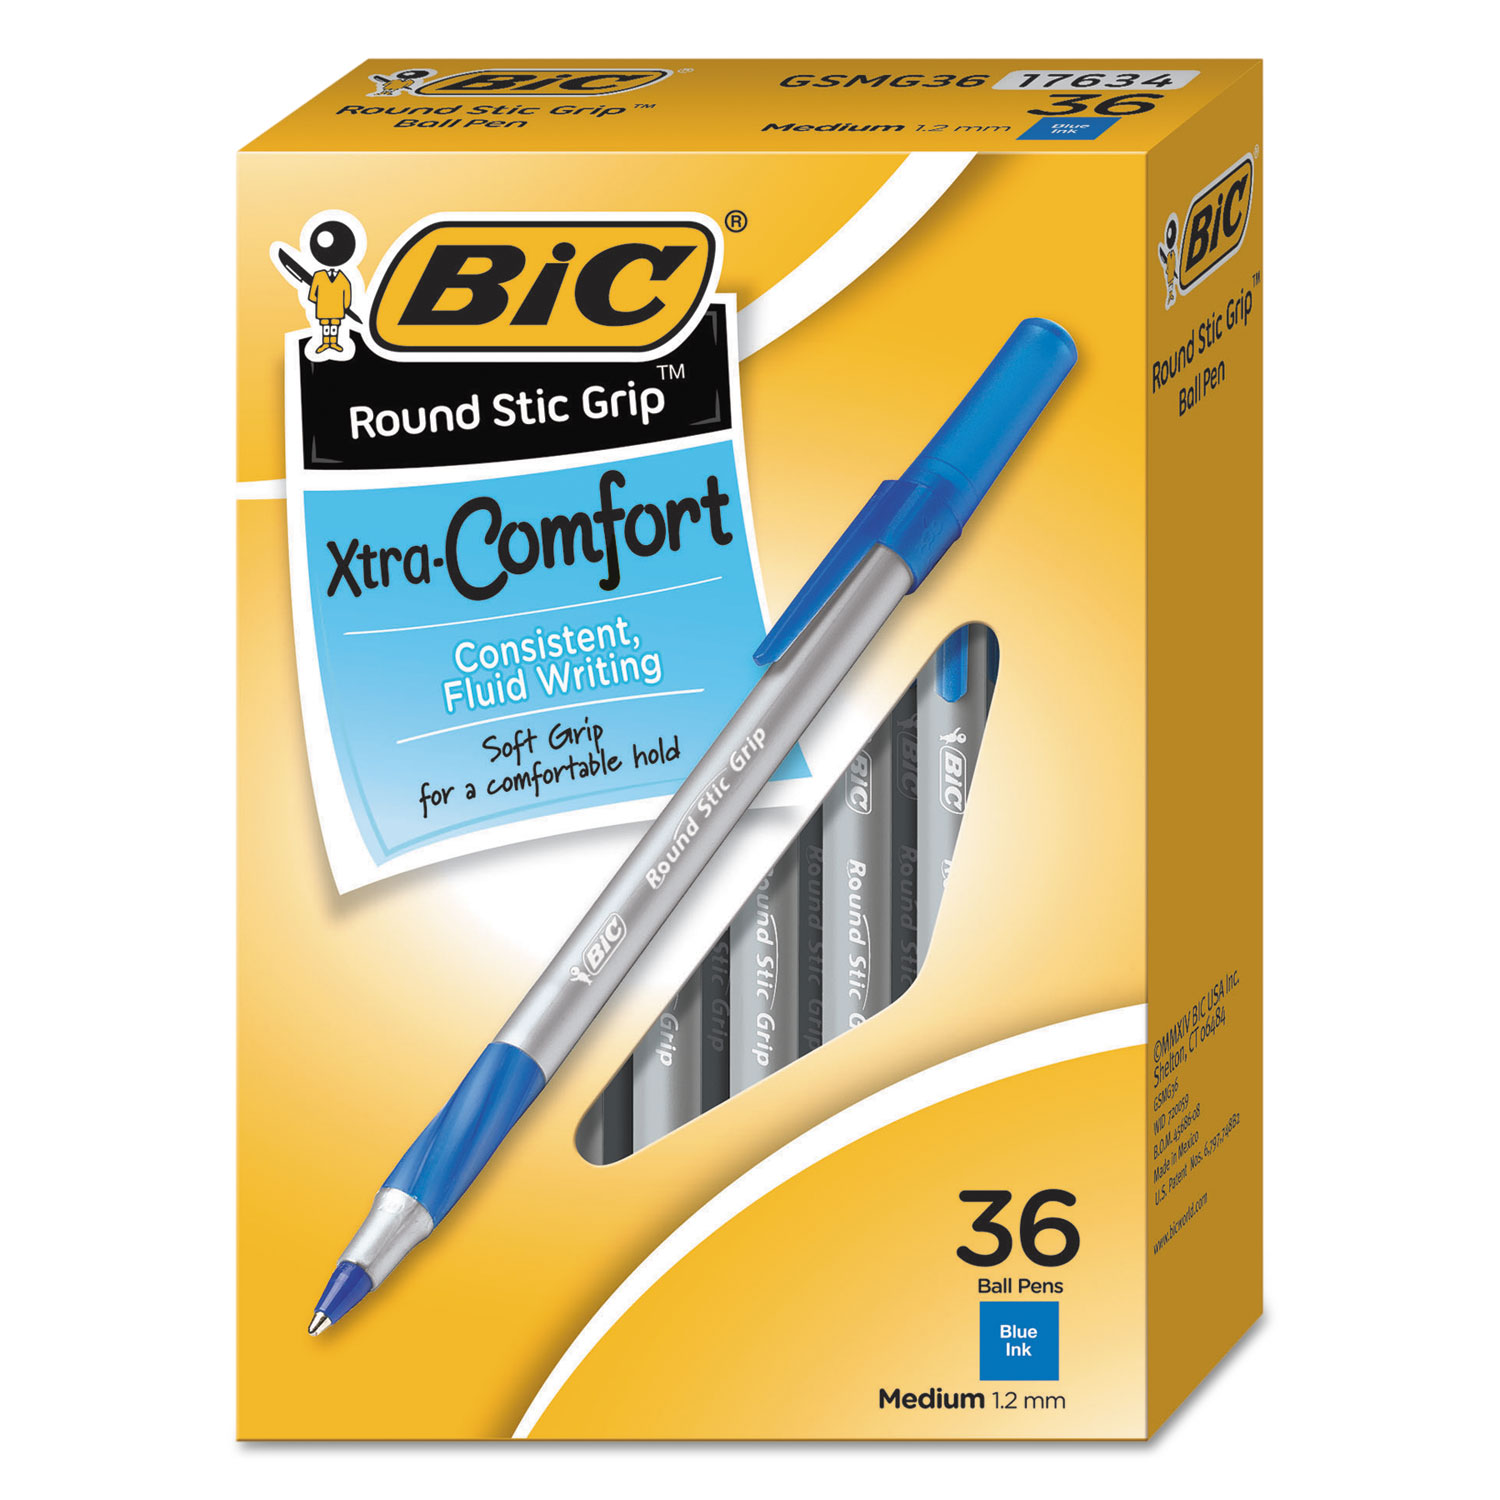 BIC Round Stic Grip Xtra Comfort Ballpoint Pens, 1.2 mm, Blue Ink - 36 Pack